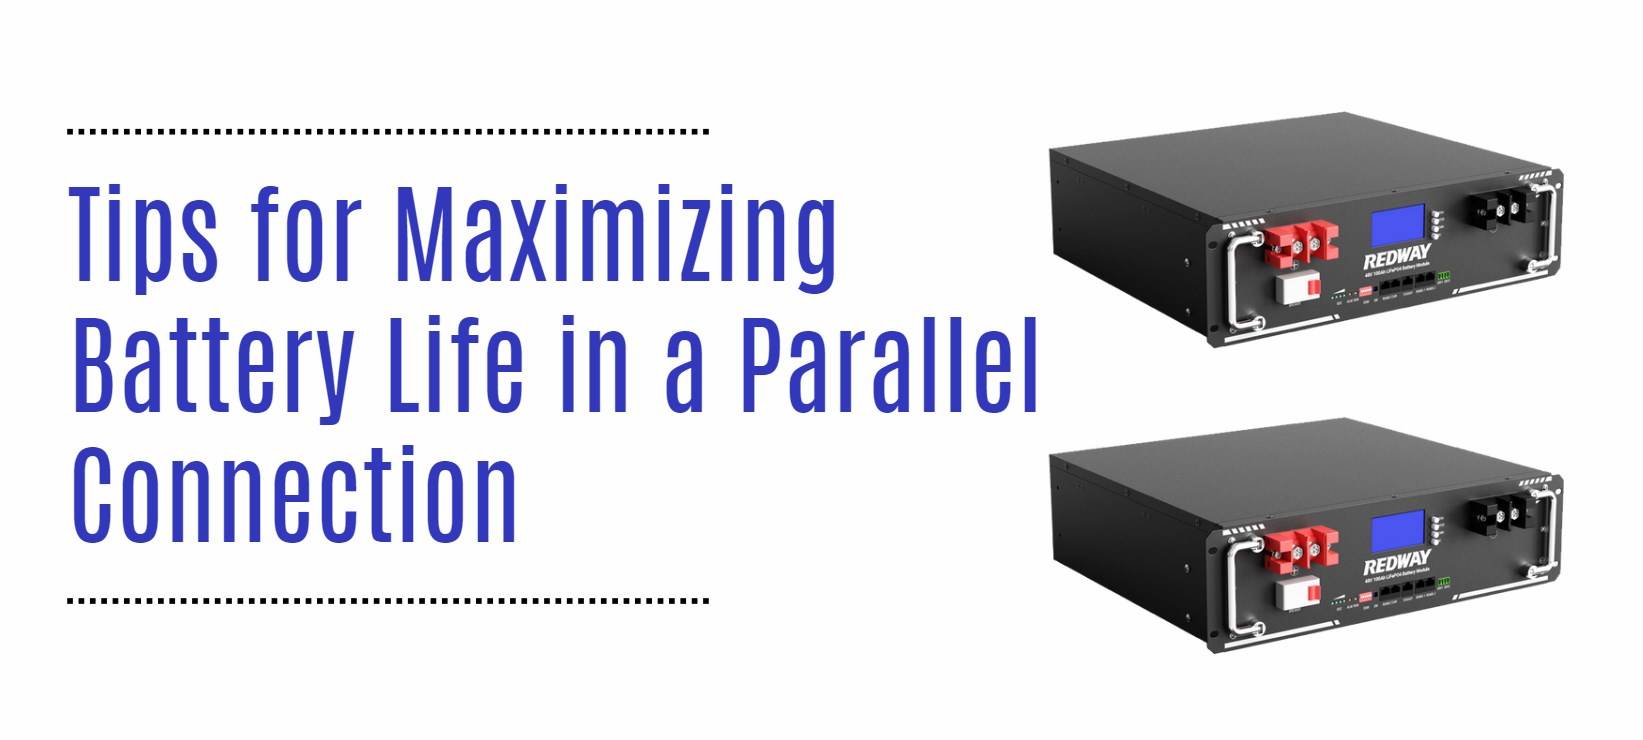 Tips for Maximizing Battery Life in a Parallel Connection. 51.2v 100ah rack battery ESS factory